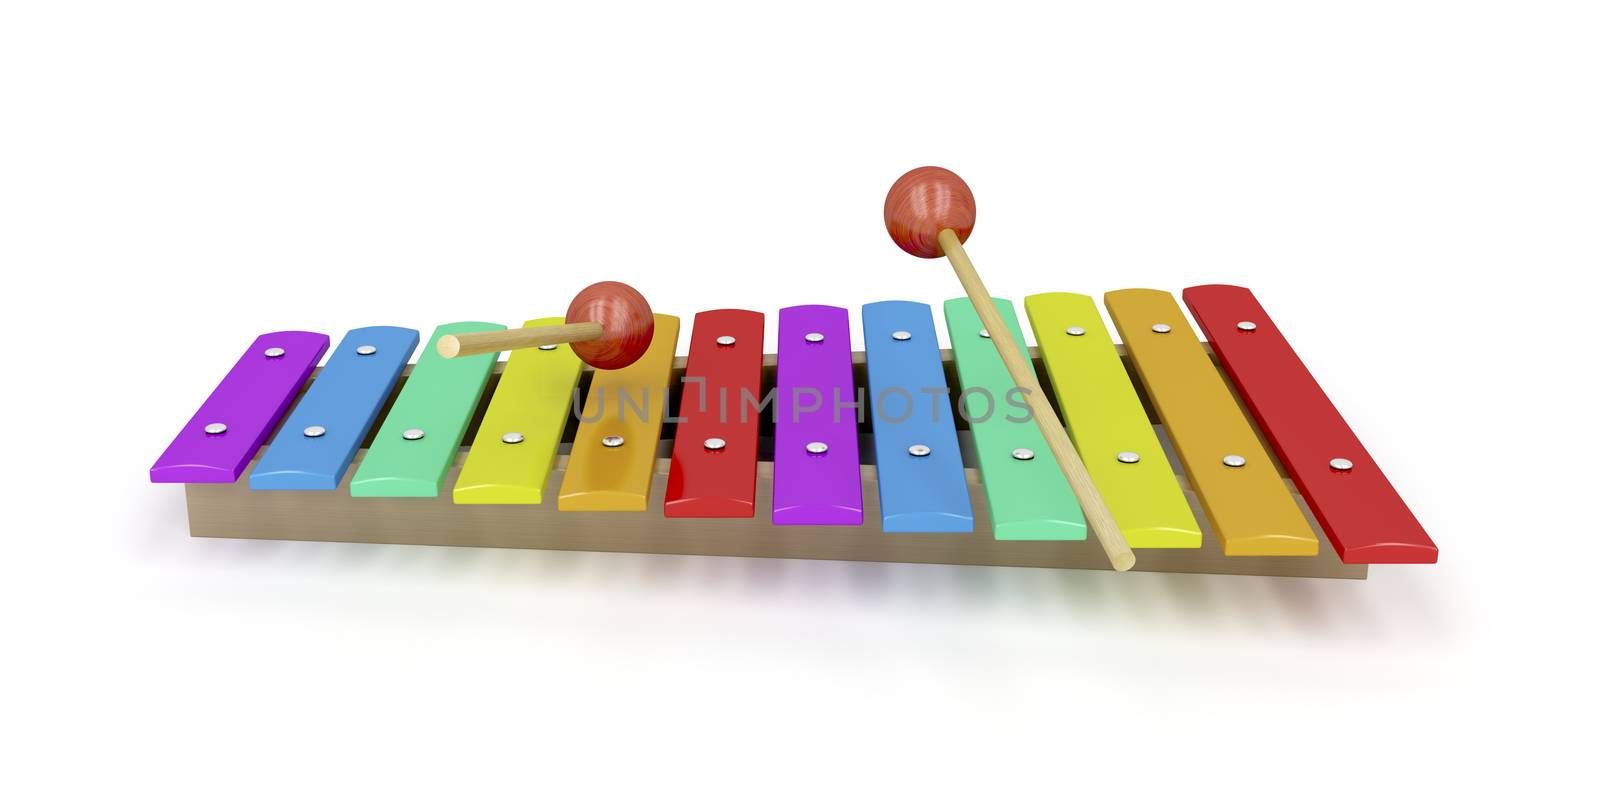 Xylophone by magraphics